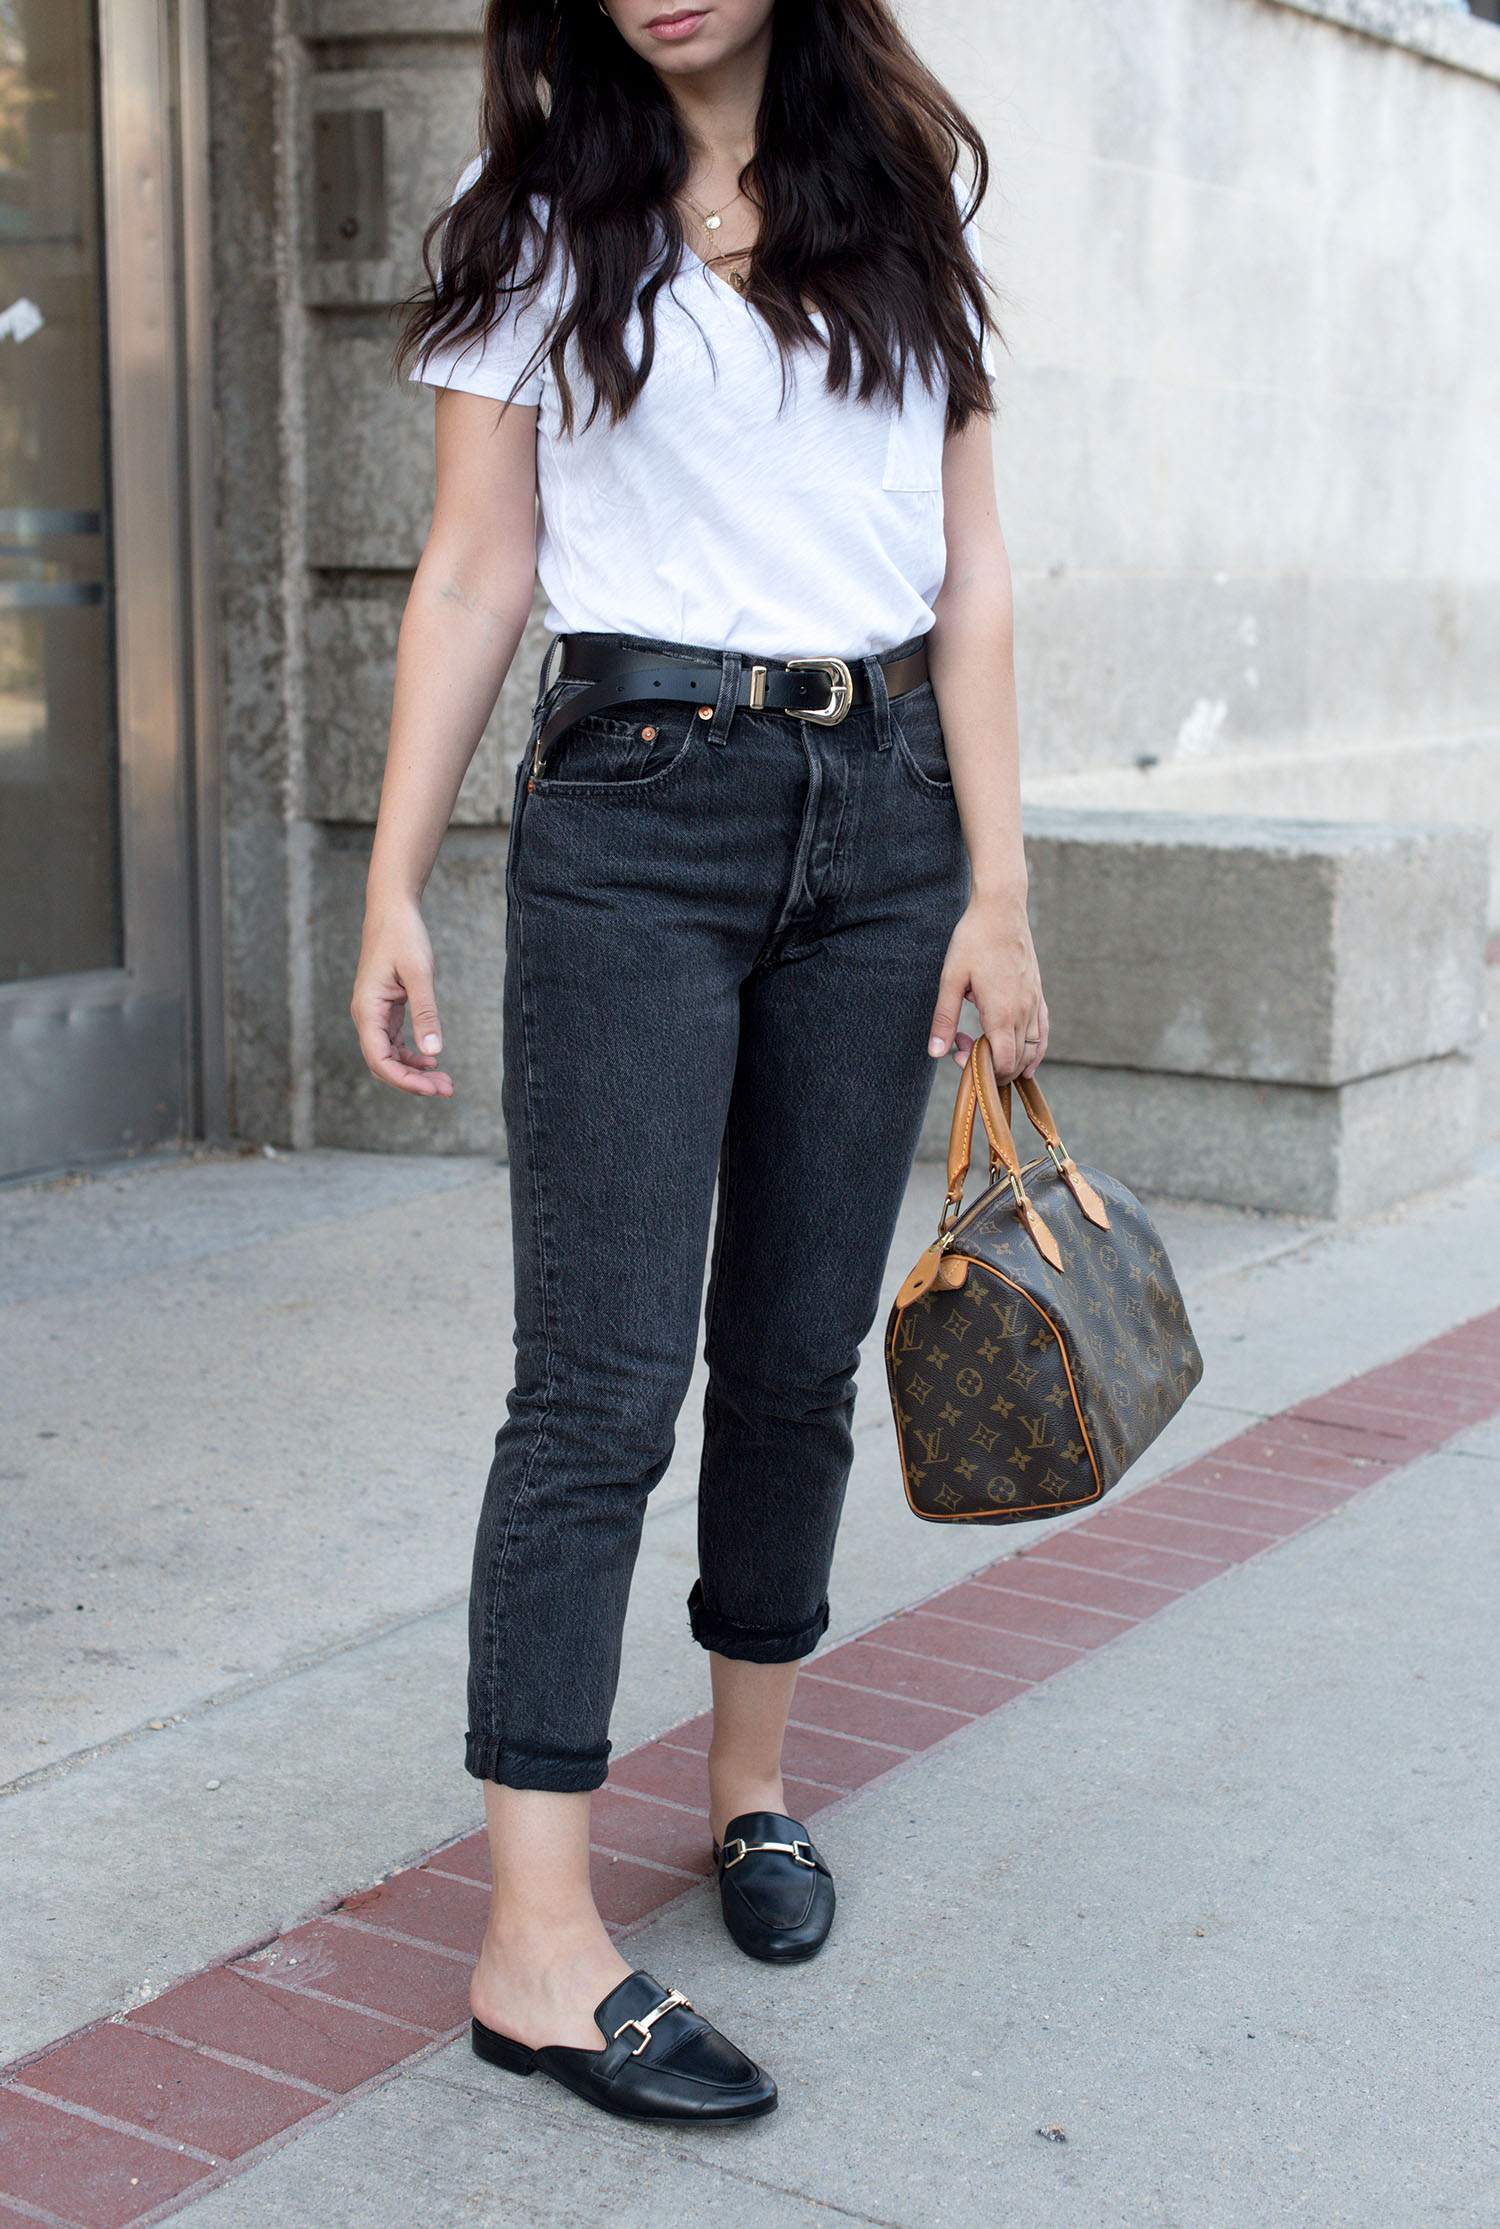 Outfit details on top Winnipeg fashion blogger Cee Fardoe of Coco & Vera including a Zara leather belt and Jonak mules